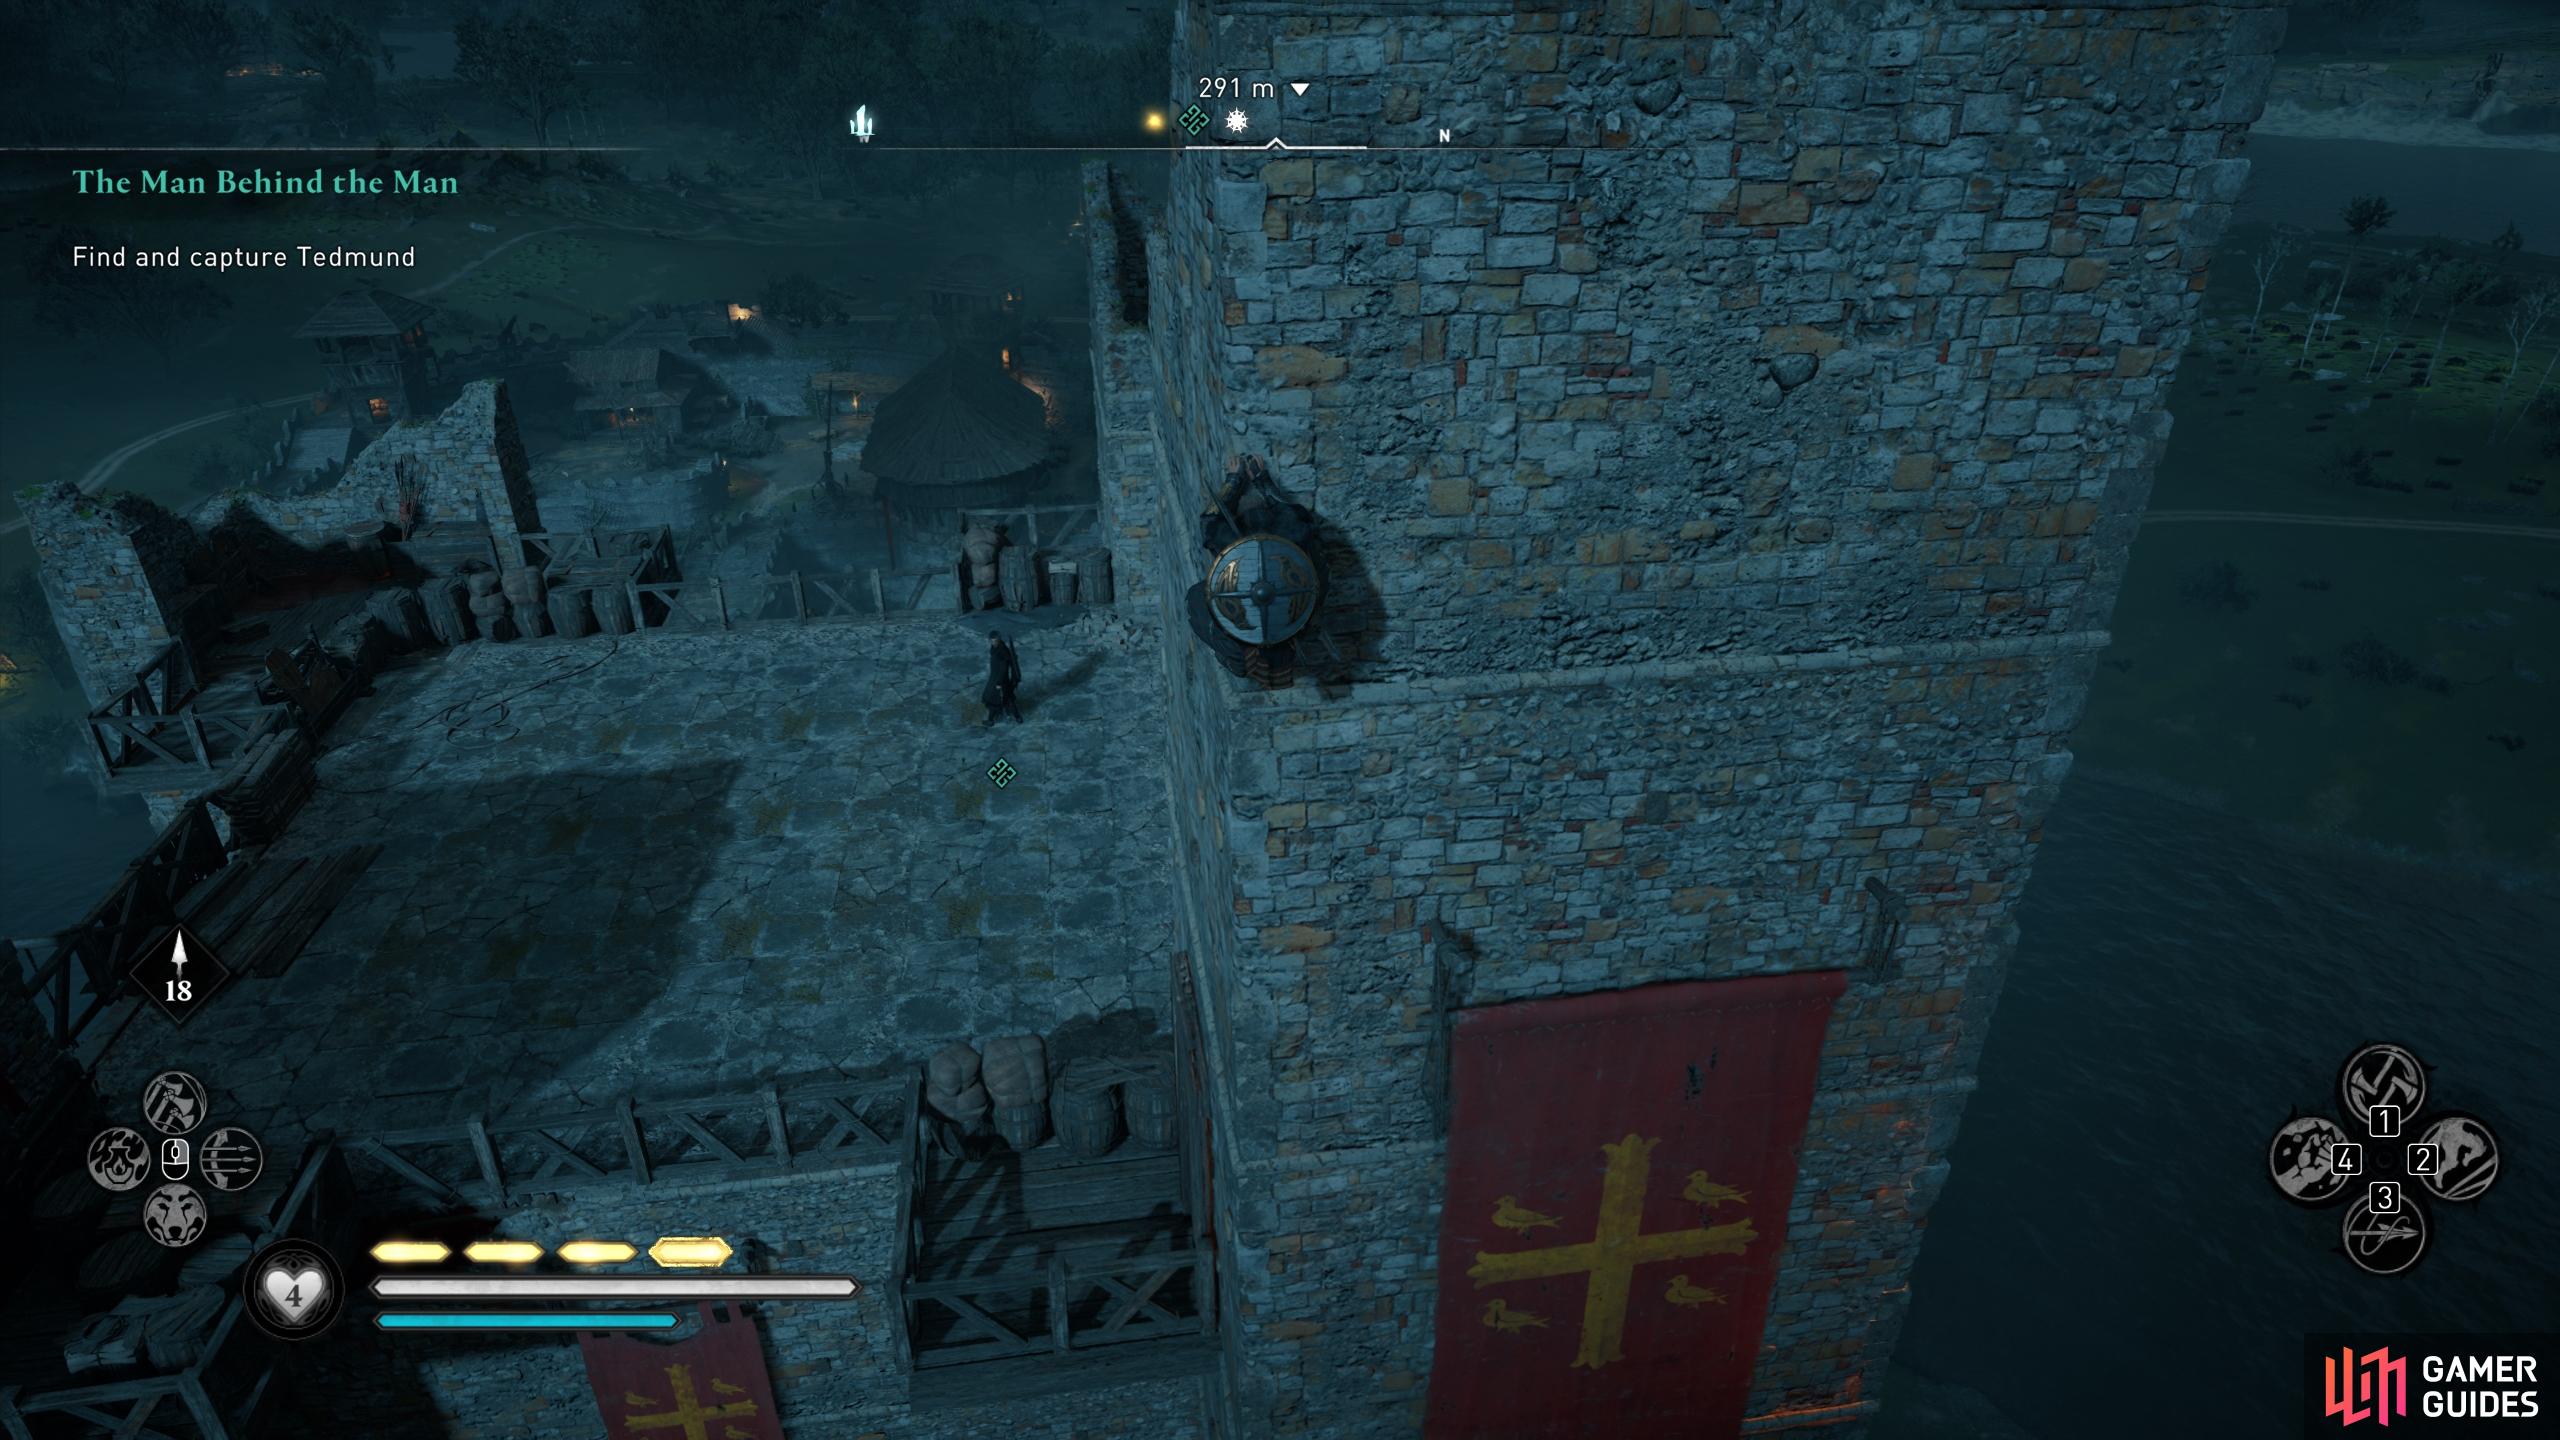 You'll find Tedmund at the top of the keep.